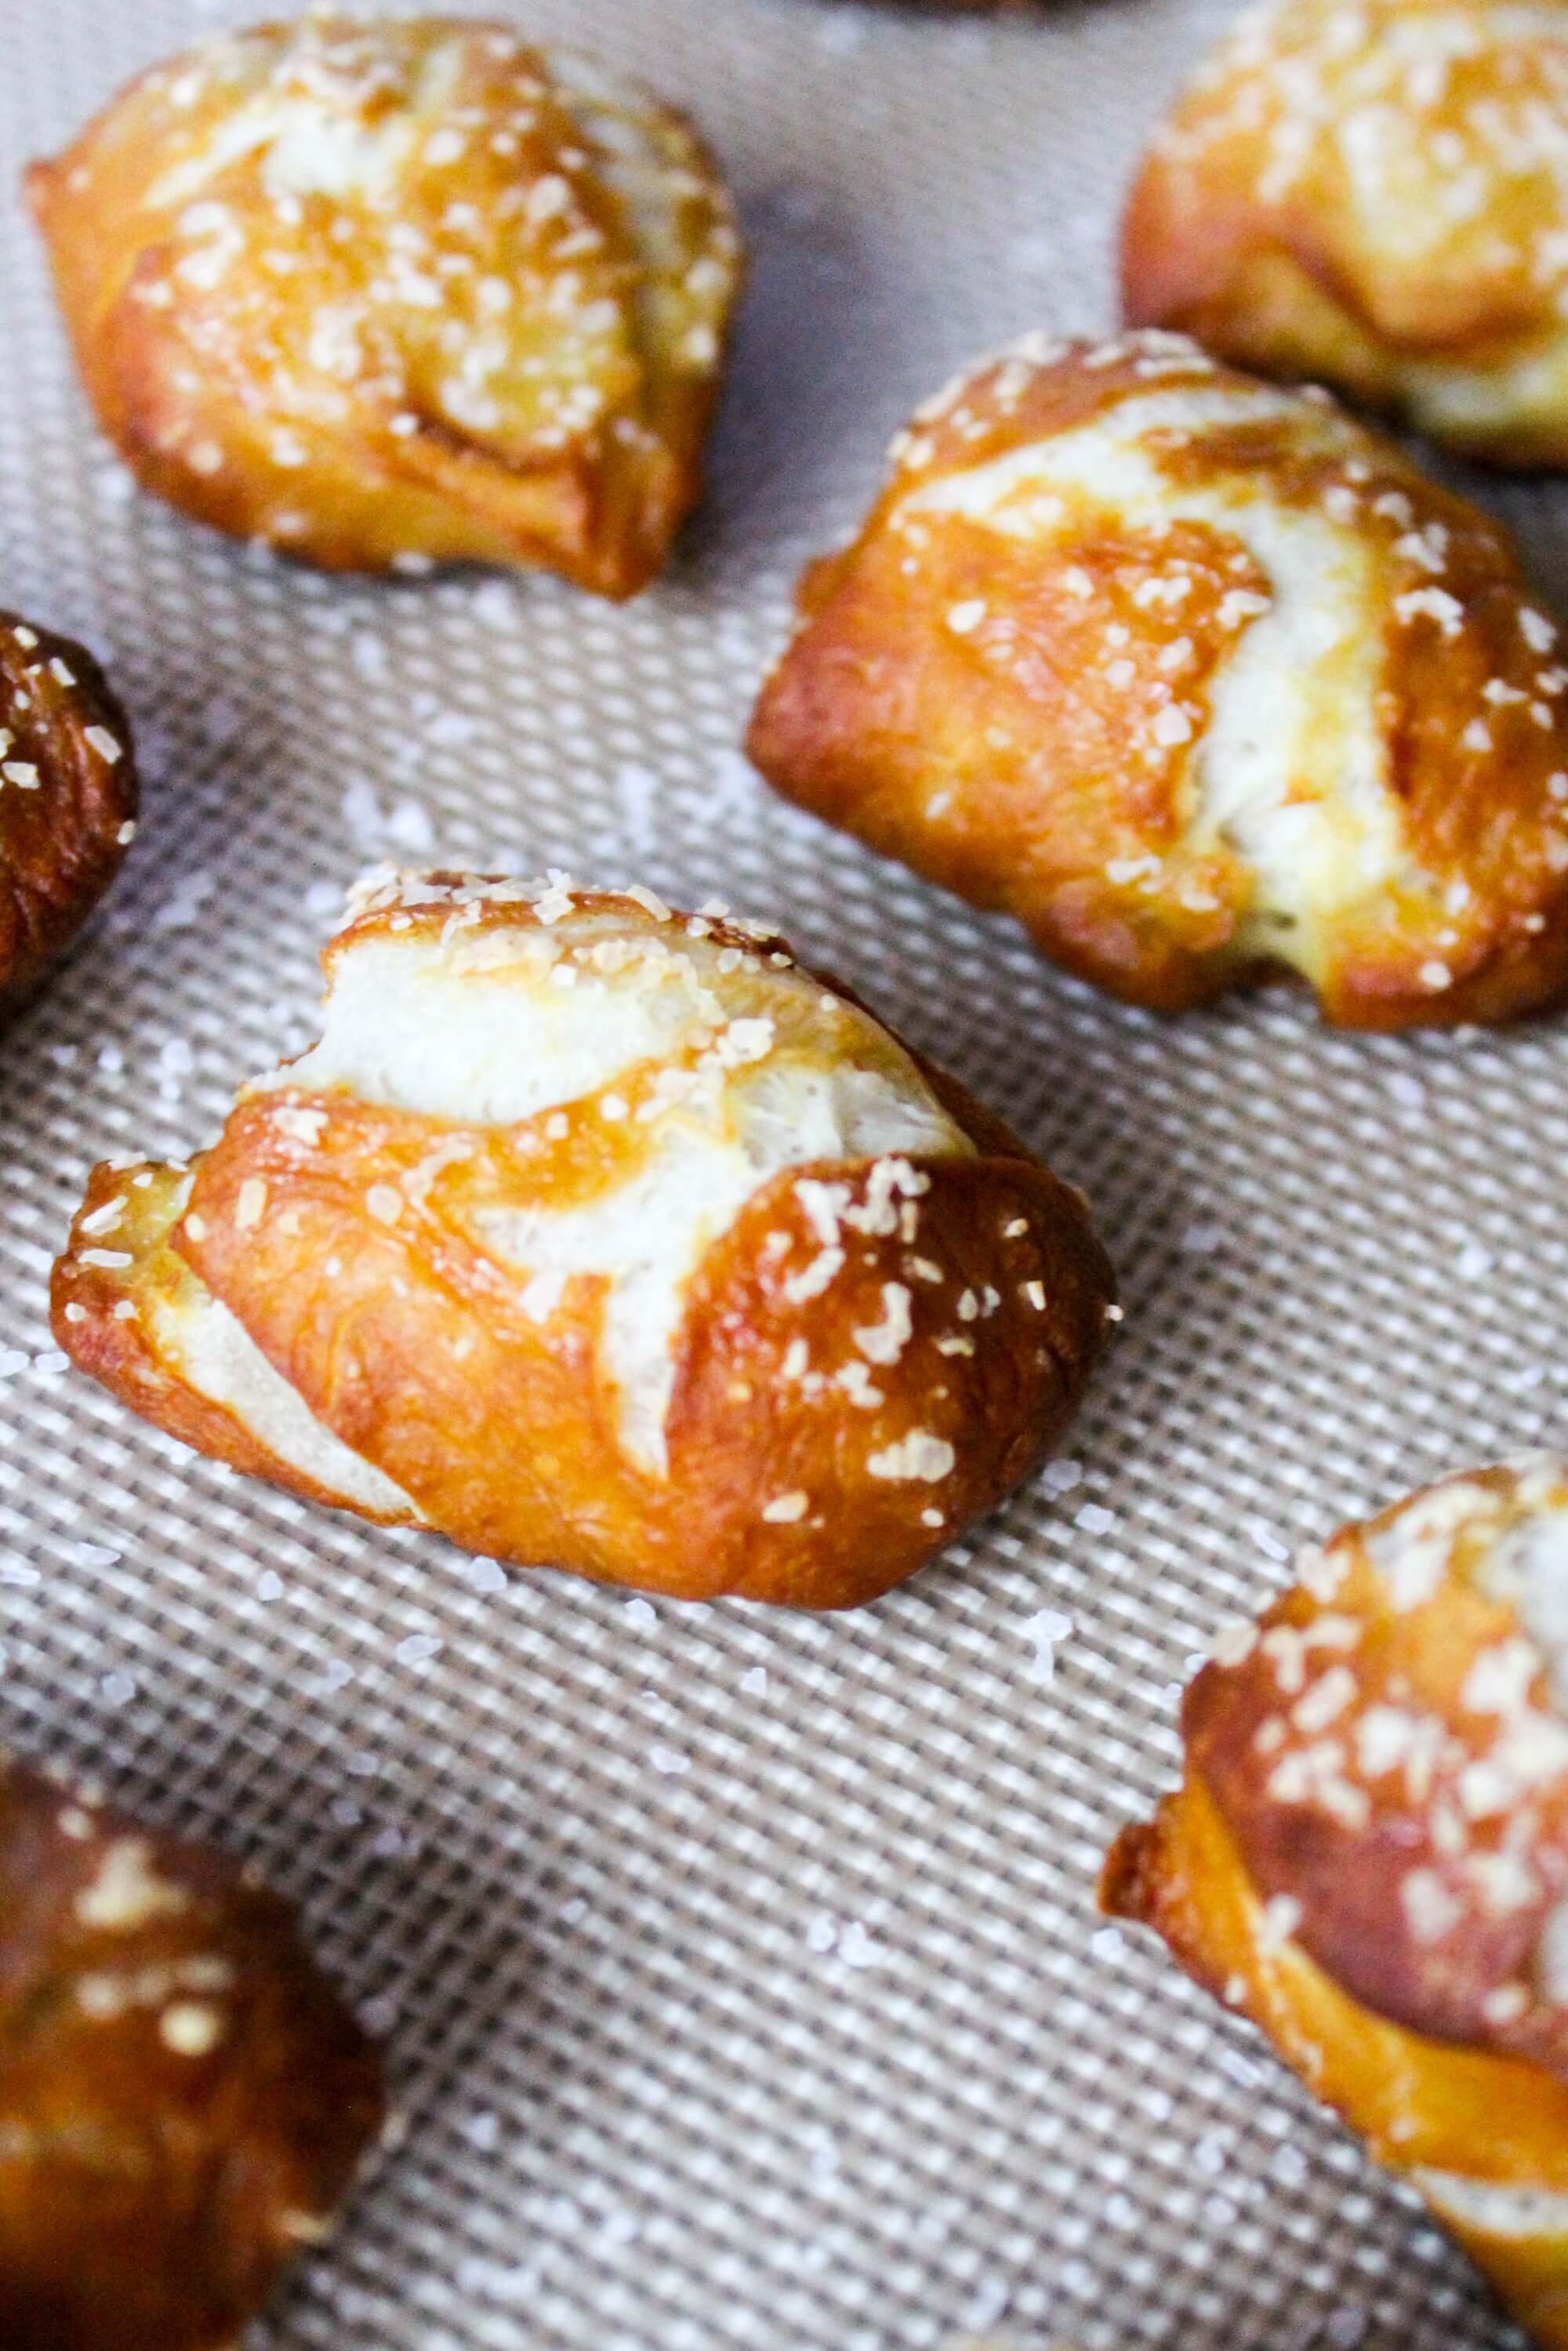 Beer cheese dip with soft pretzel bites are salty soft pretzel bites. This beer cheese dip is made with Tecate Light and it's so creamy and flavorful! This is the perfect recipe for parties and entertaining!